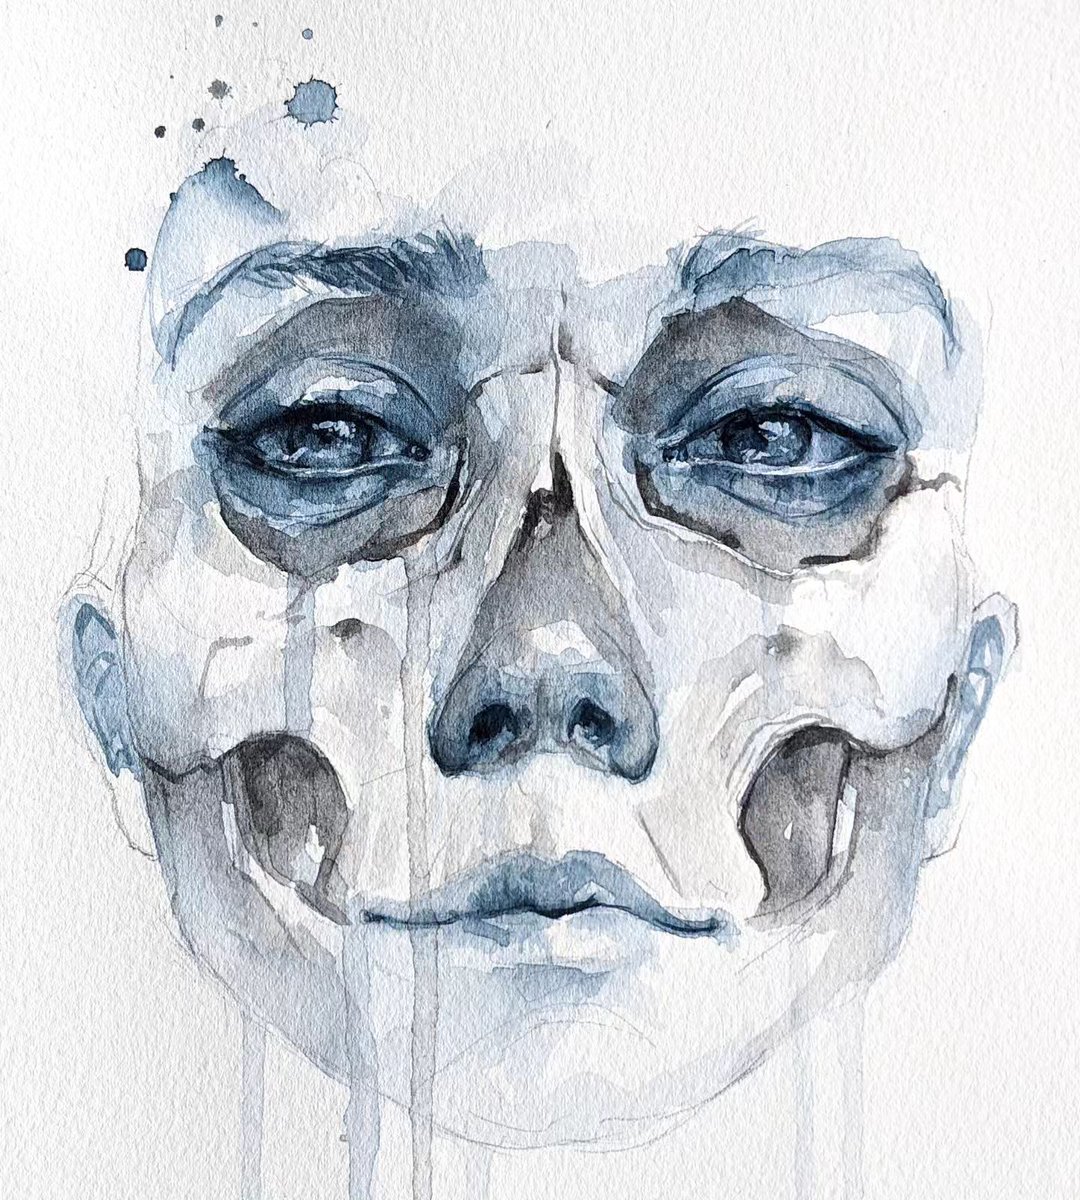 What a powerful look!

'Through Dead Eyes' by watercolour artist @_tkeh_ ❤

#beautifulbizarre #tkeh #ukartist #welshartist #watercolourpainting #darkart #watercolourportrait #watercolorportrait #mentalhealthart #watercolorart #skullpainting #horrorart #paintingsinspo